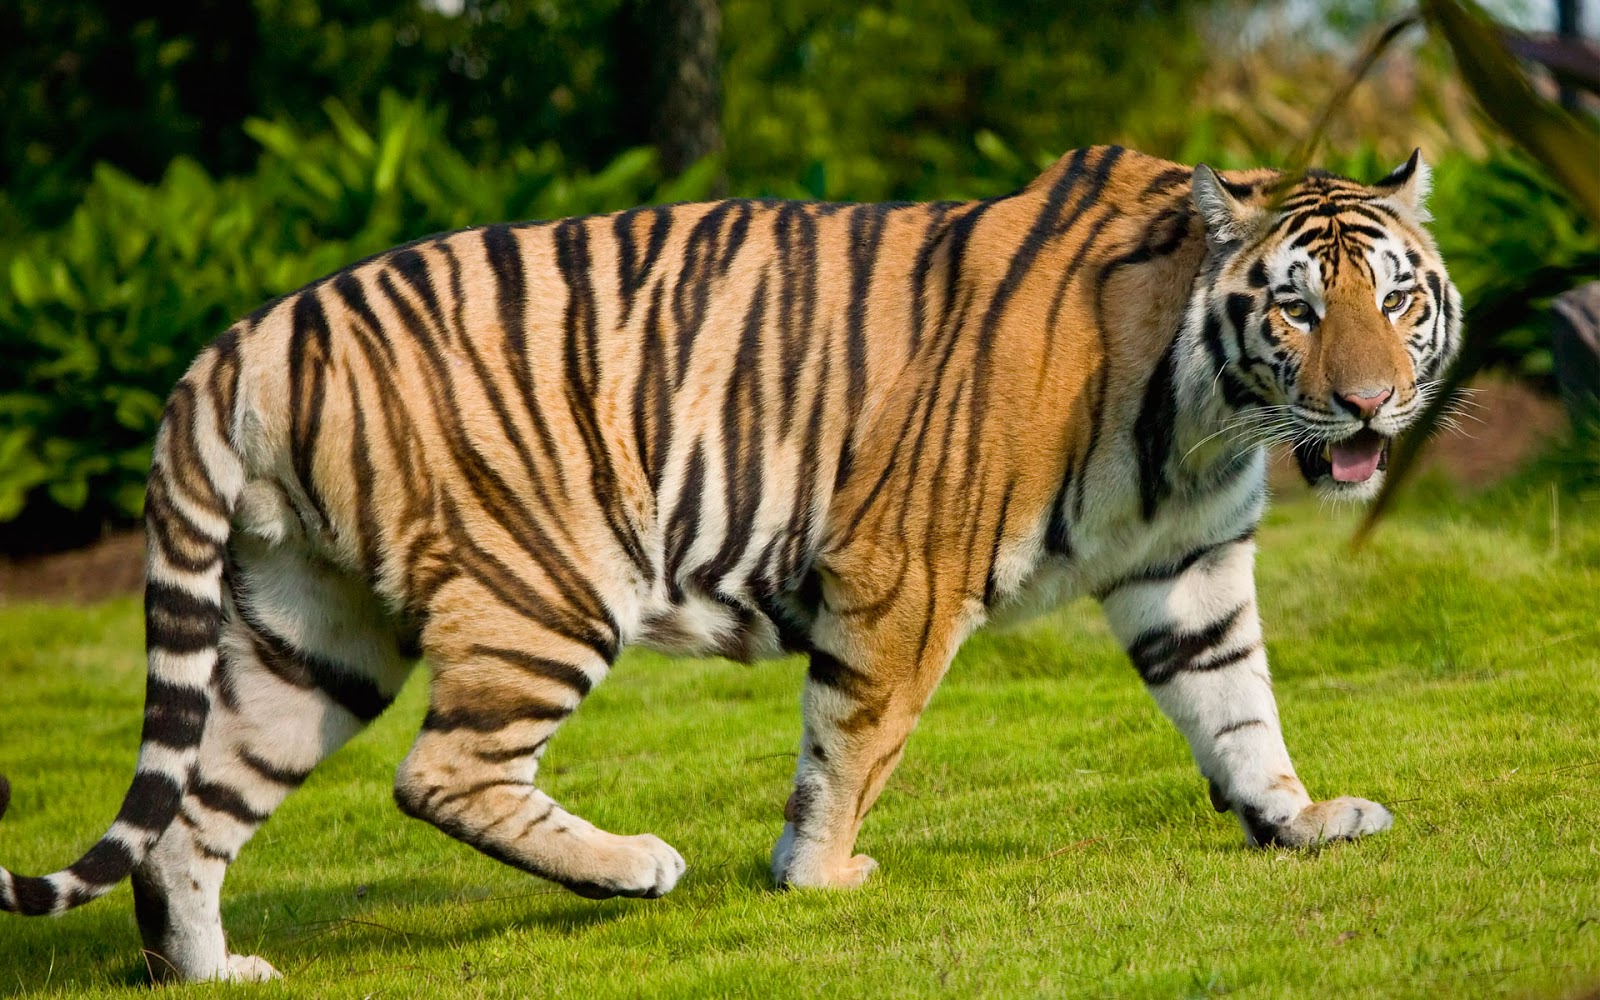 What facts contribute to tigers being an endangered species?